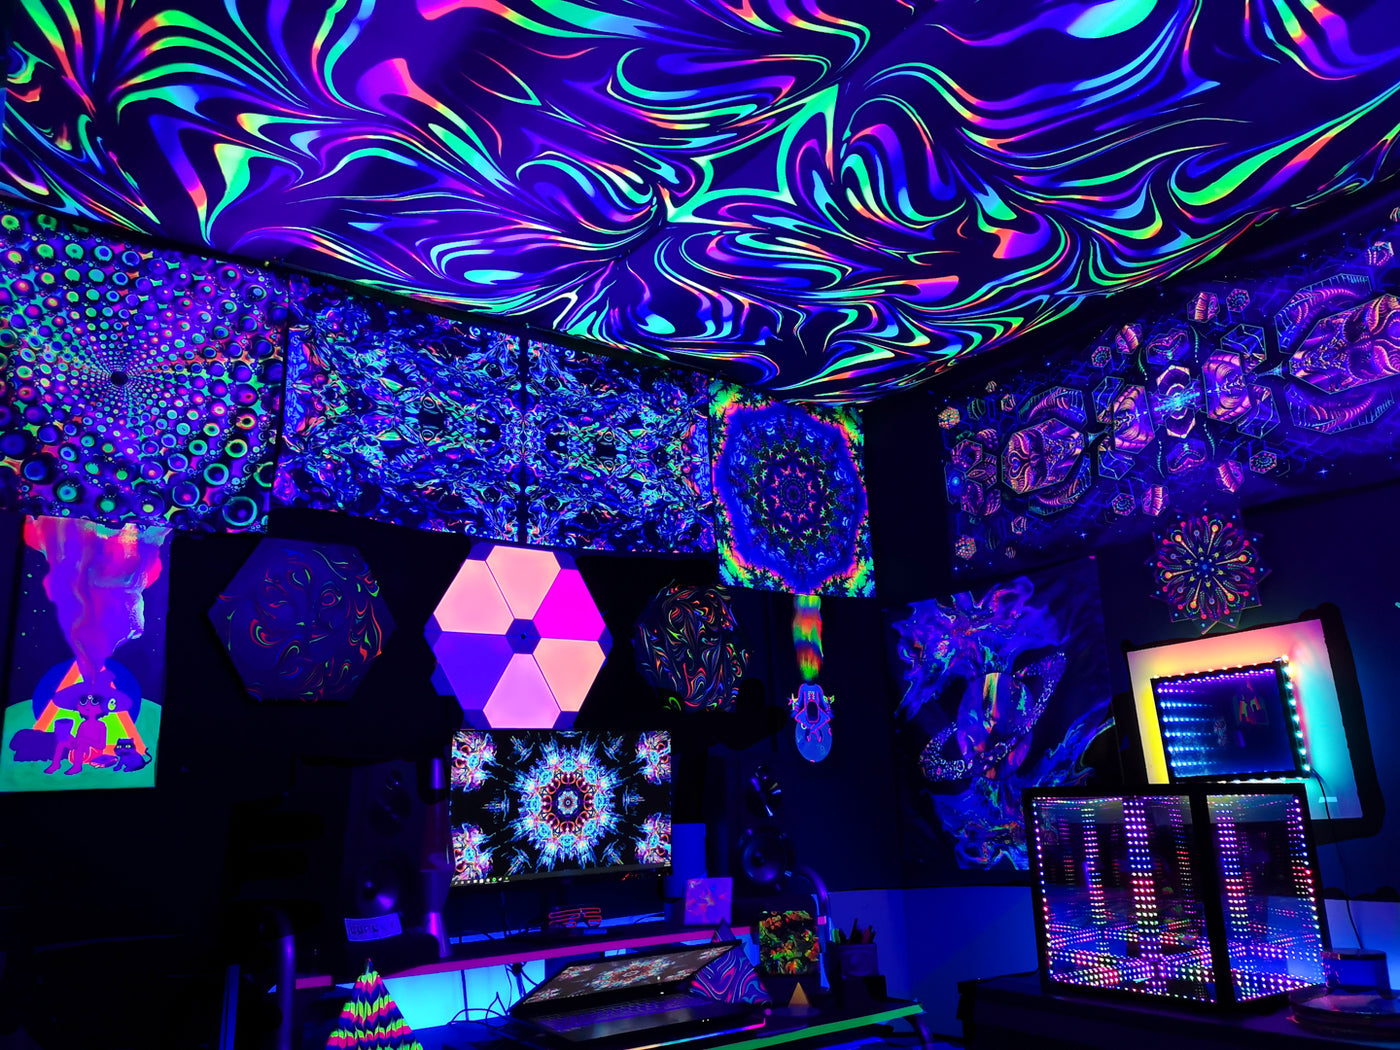 Office space decorated with trippy, psychedelic prints as well as a Hypercube with color changing lights - perfect environment for a meditative trip